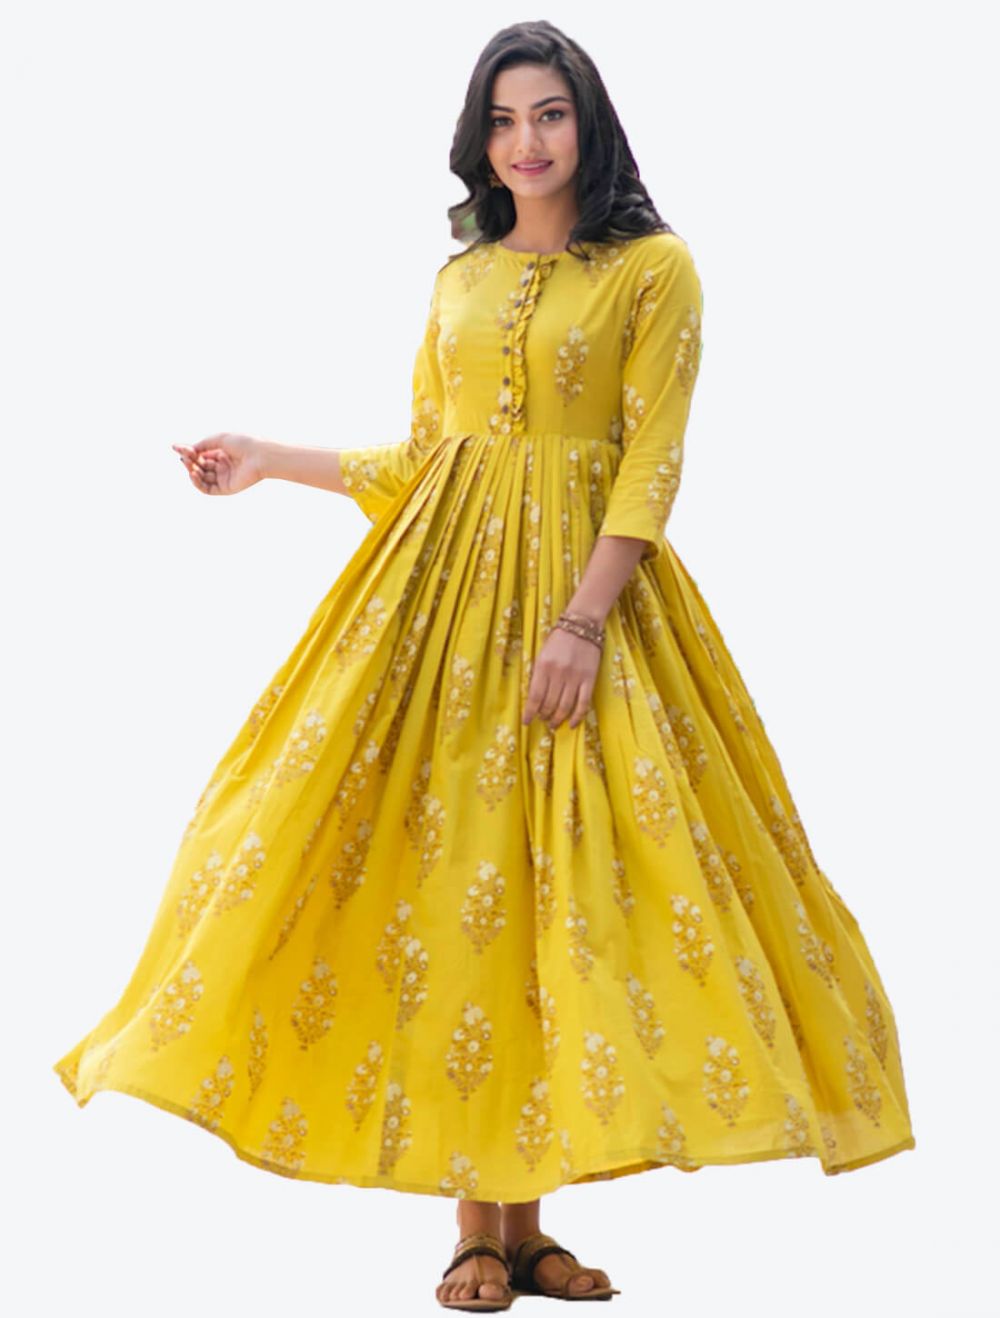 A never-seen-before festive collection of Kurtis in different shades -  Mustard Fashion